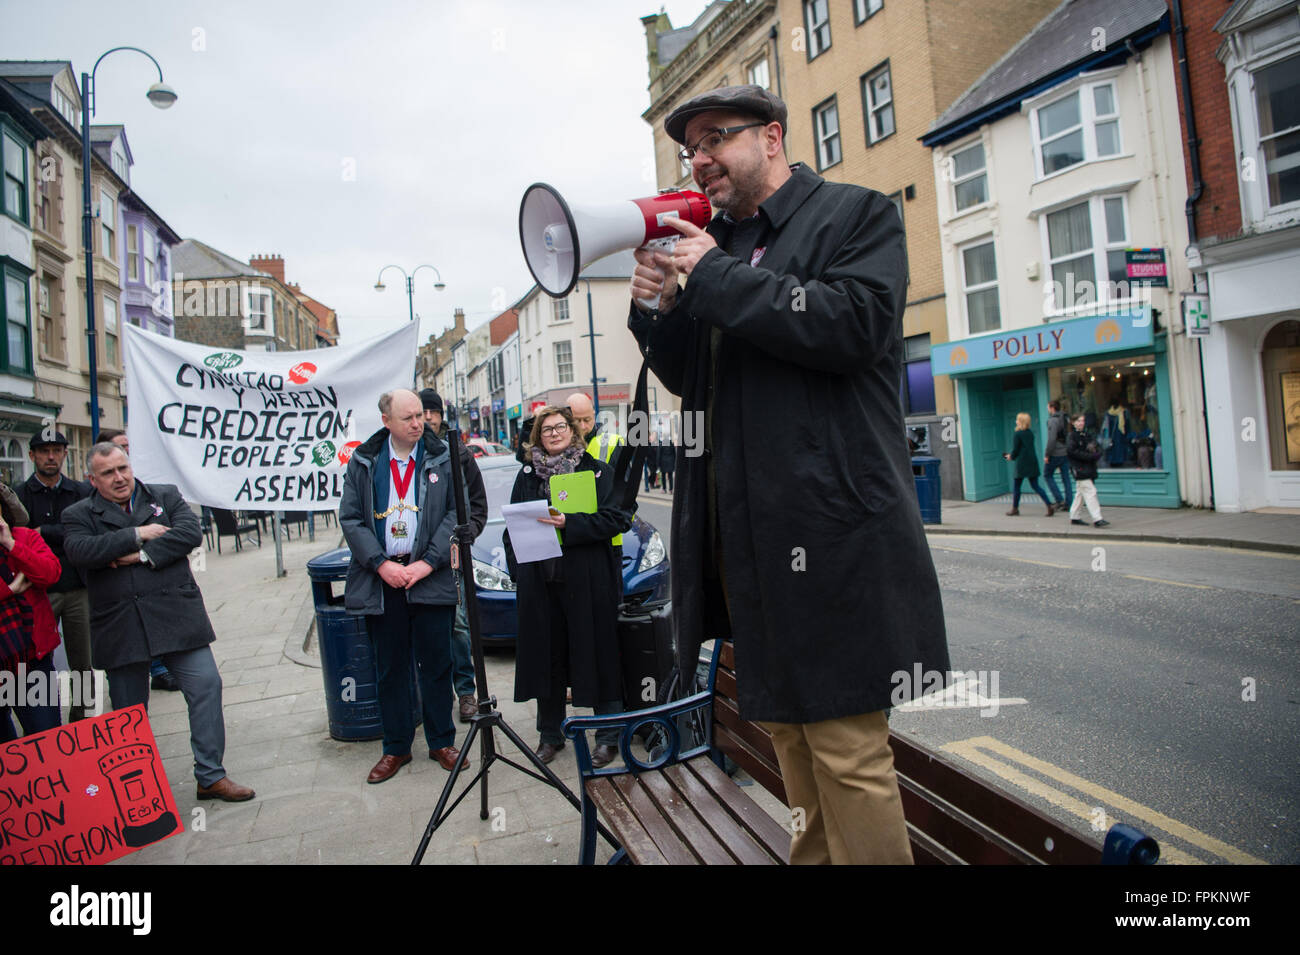 Aberystwyth, Wales, UK. 19th March, 2016. SIMON THOMAS, PLaid Cymru assembly member addressing a public protest in the centre of Aberystwyth to protest at the planned closure of the town's only post office and to move the services it provides to a ‘franchise' in a shop or store photo Credit:  keith morris/Alamy Live News Stock Photo